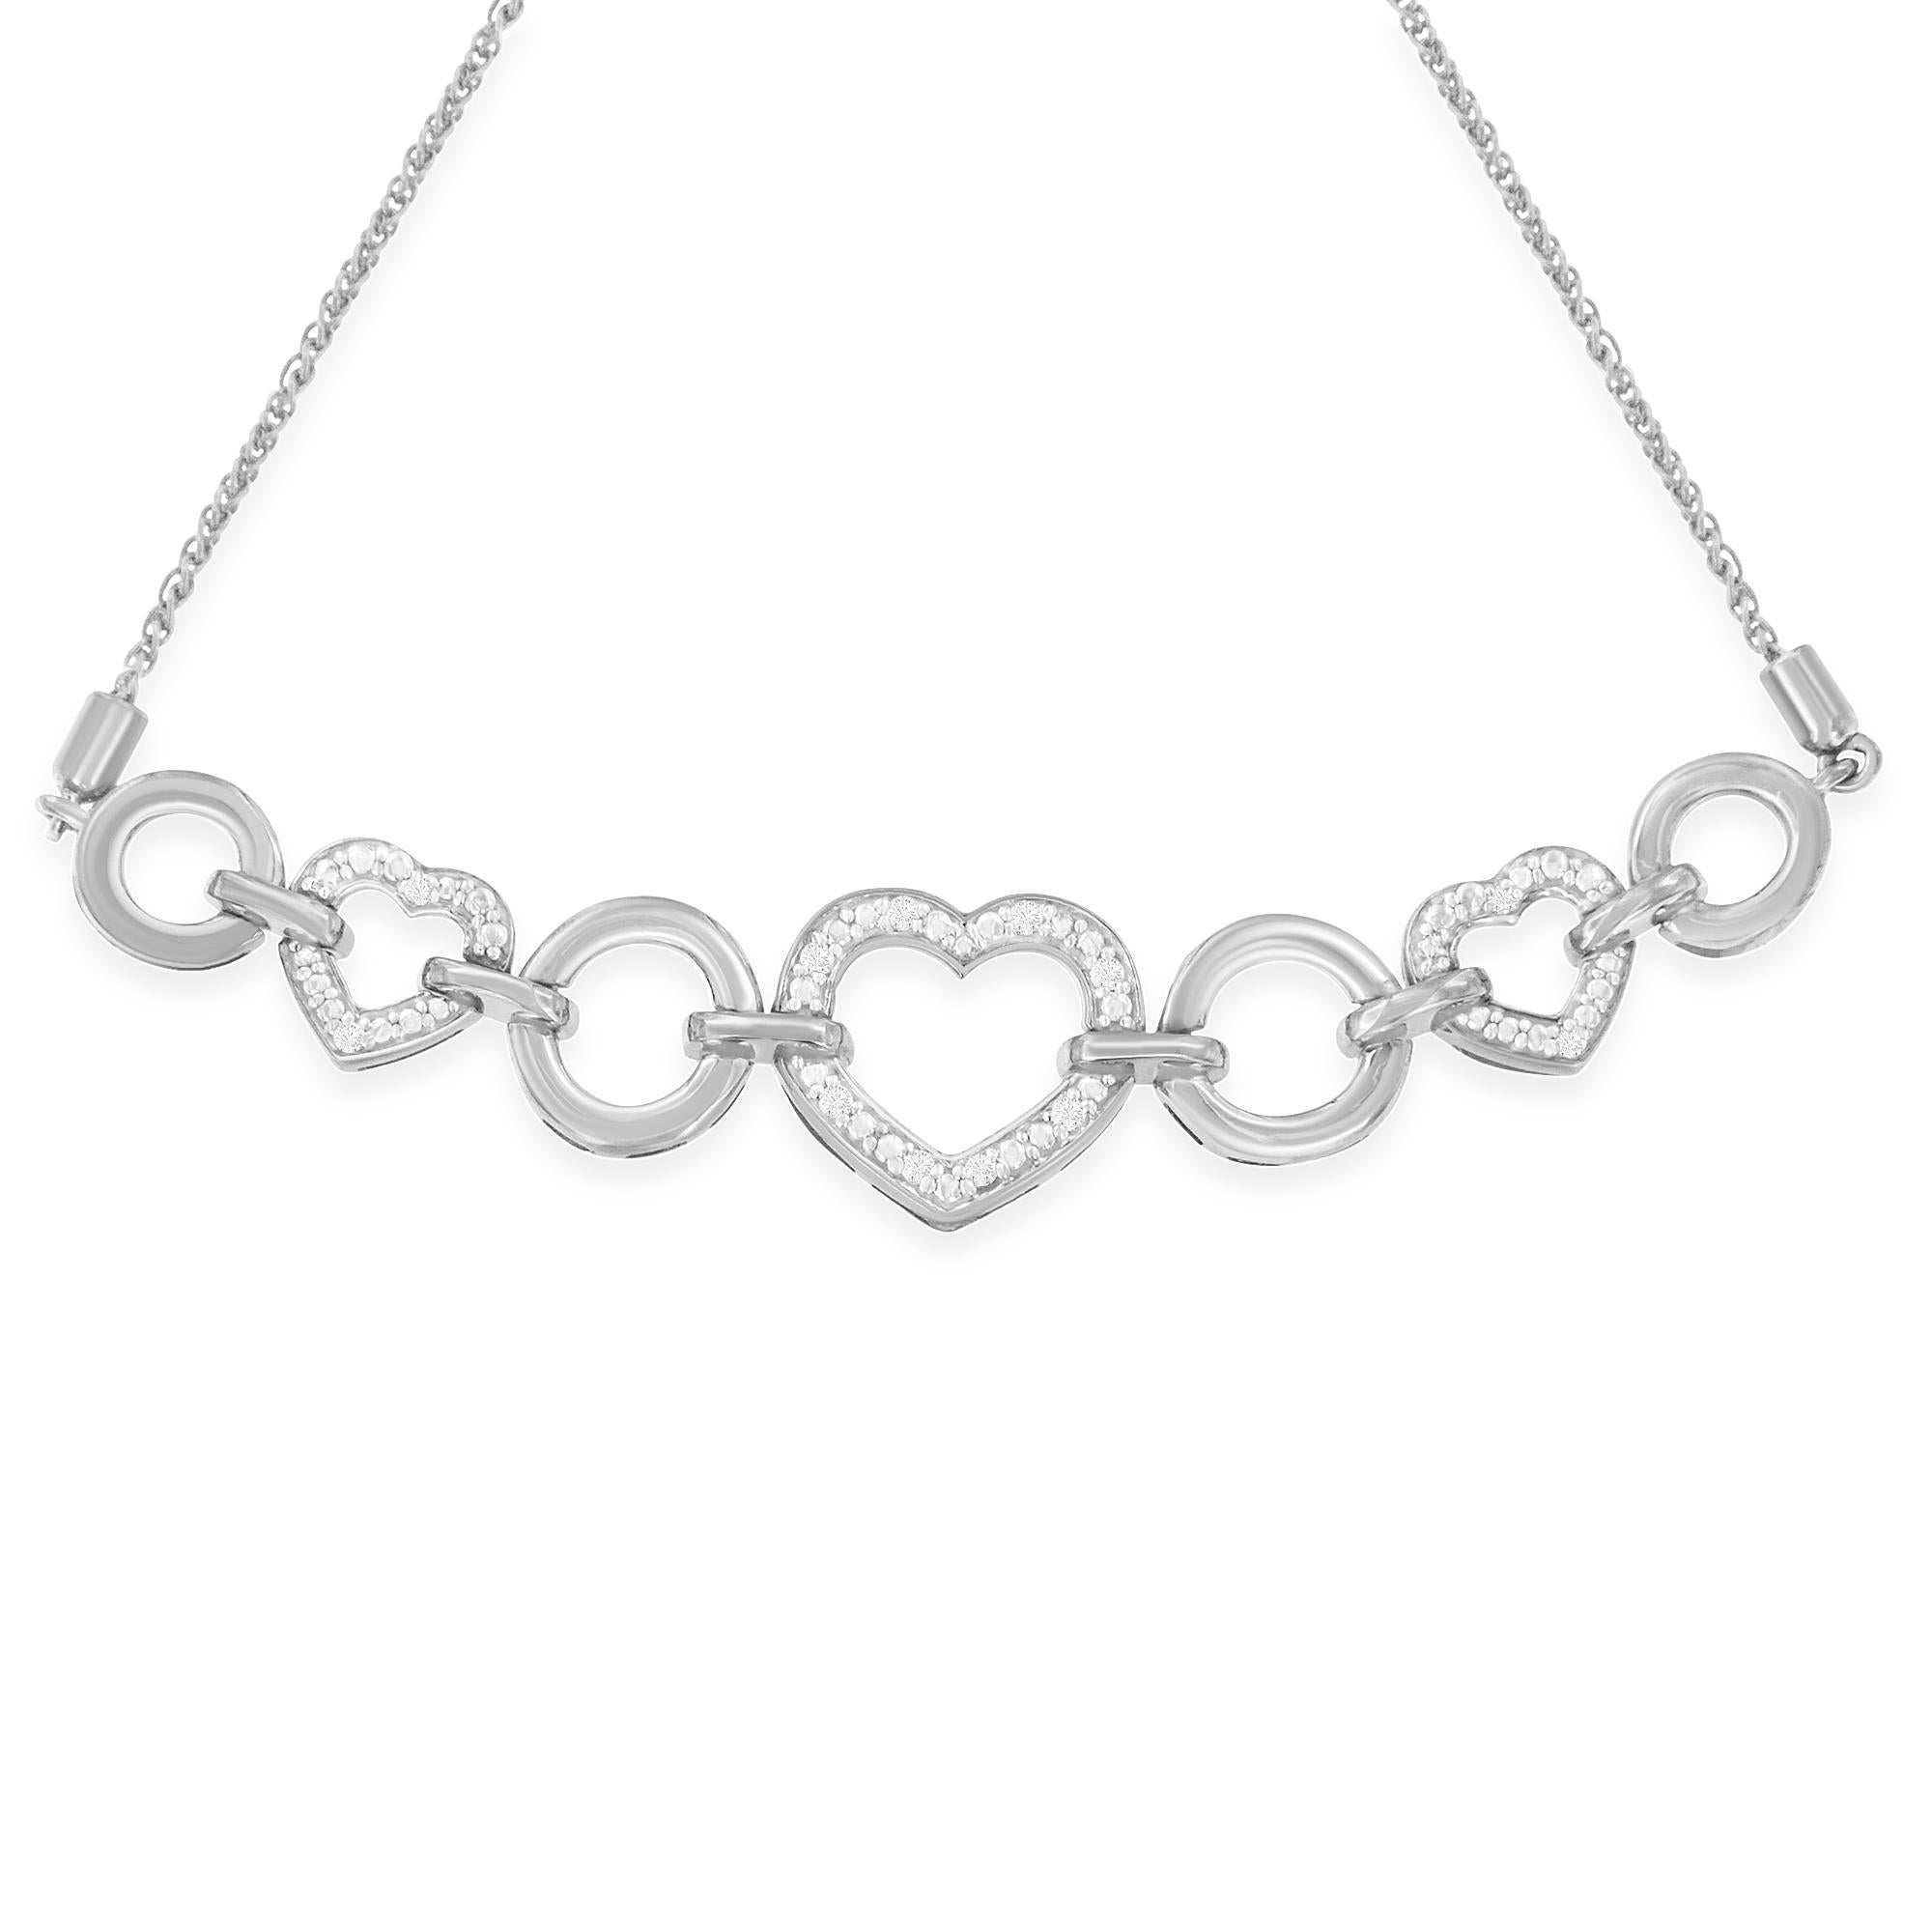 Stay on trend with this alluring chain bracelet. It is crafted of sterling silver and features interlocking heart and infinity accents that are adorned with sparkling round cut diamonds. This modern bracelet makes a perfect Valentine's Day gift, or